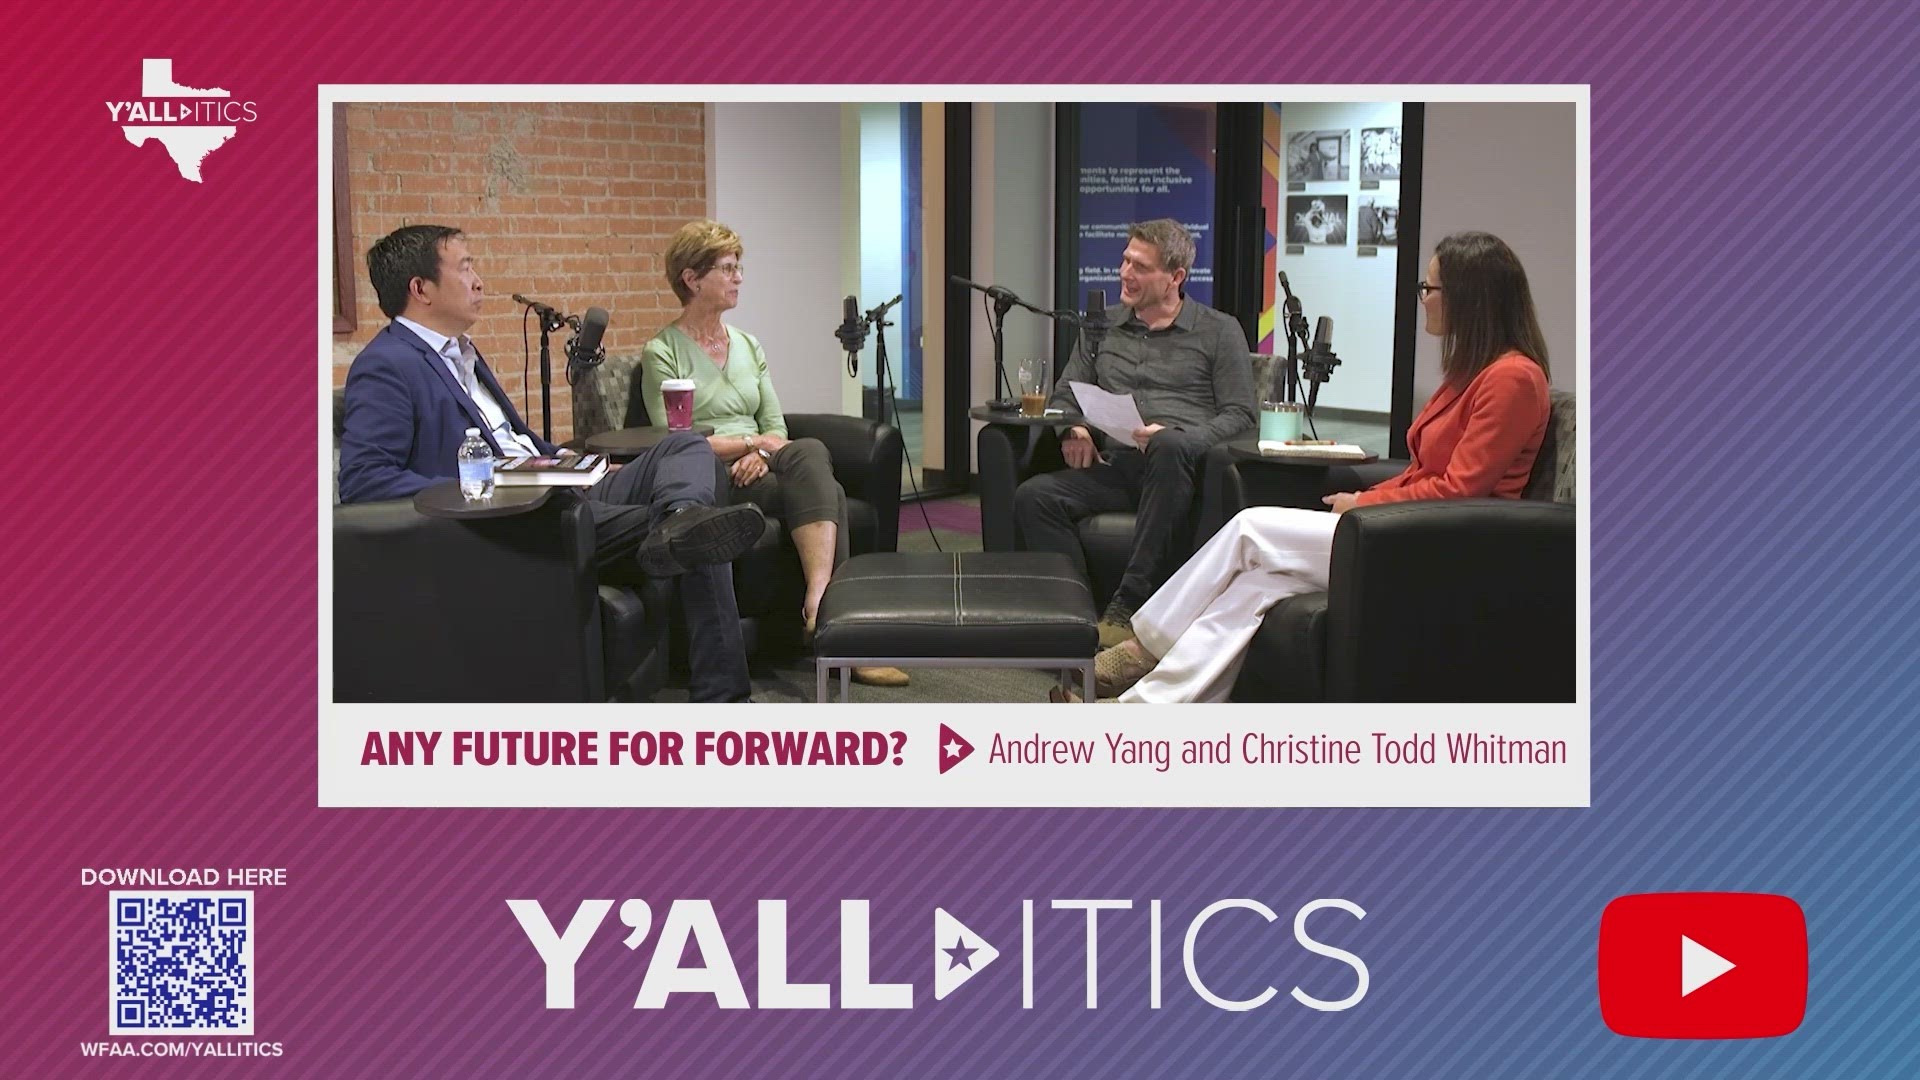 A third political party is challenging two decades of Republican dominance in Texas. Andrew Yang and Christine Todd Whitman sit down to discuss the movement.